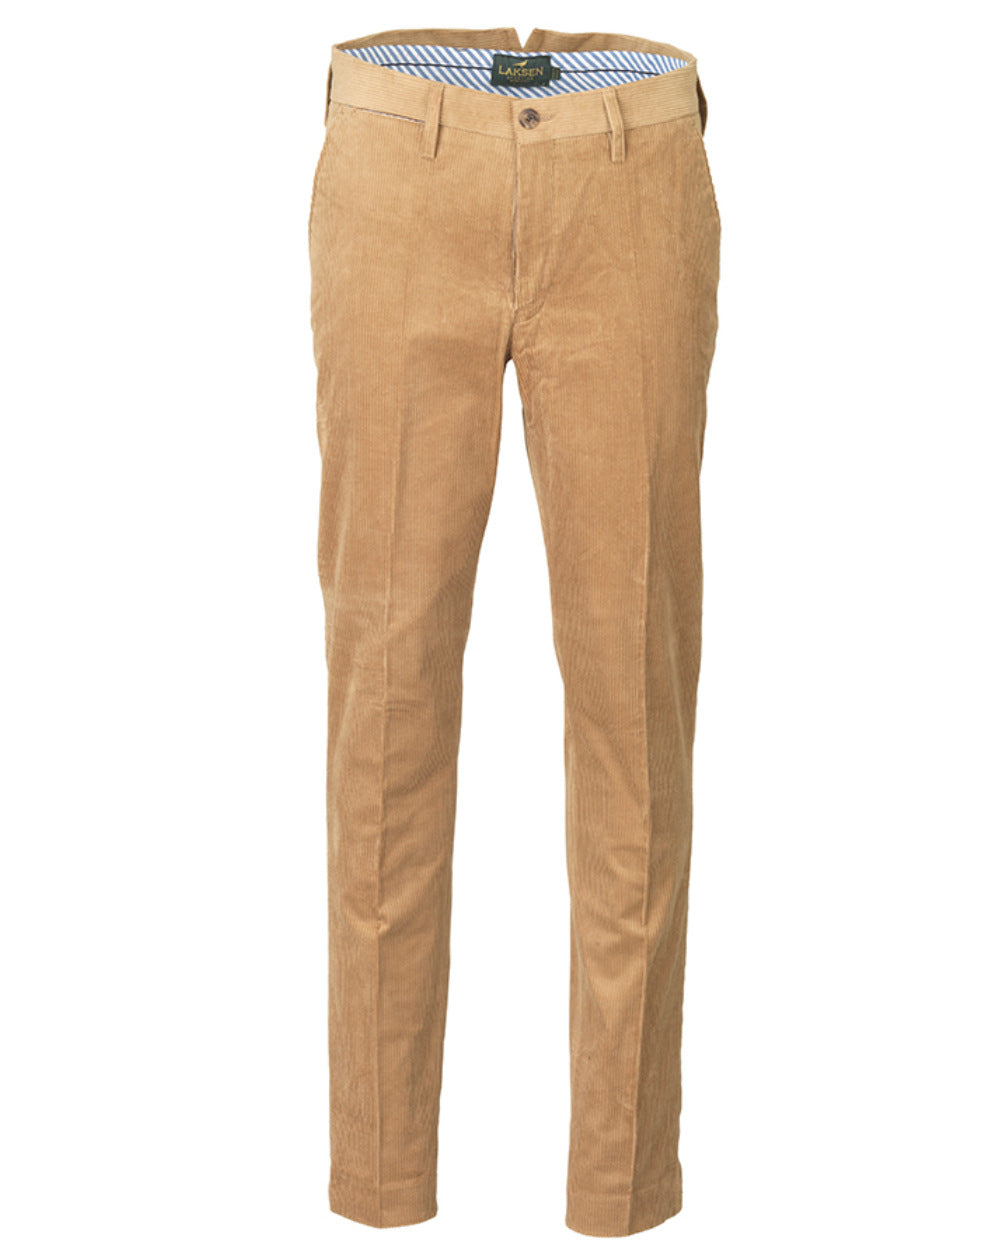 Camel Coloured Laksen Mayfair Corduroy Trousers On A White Background 